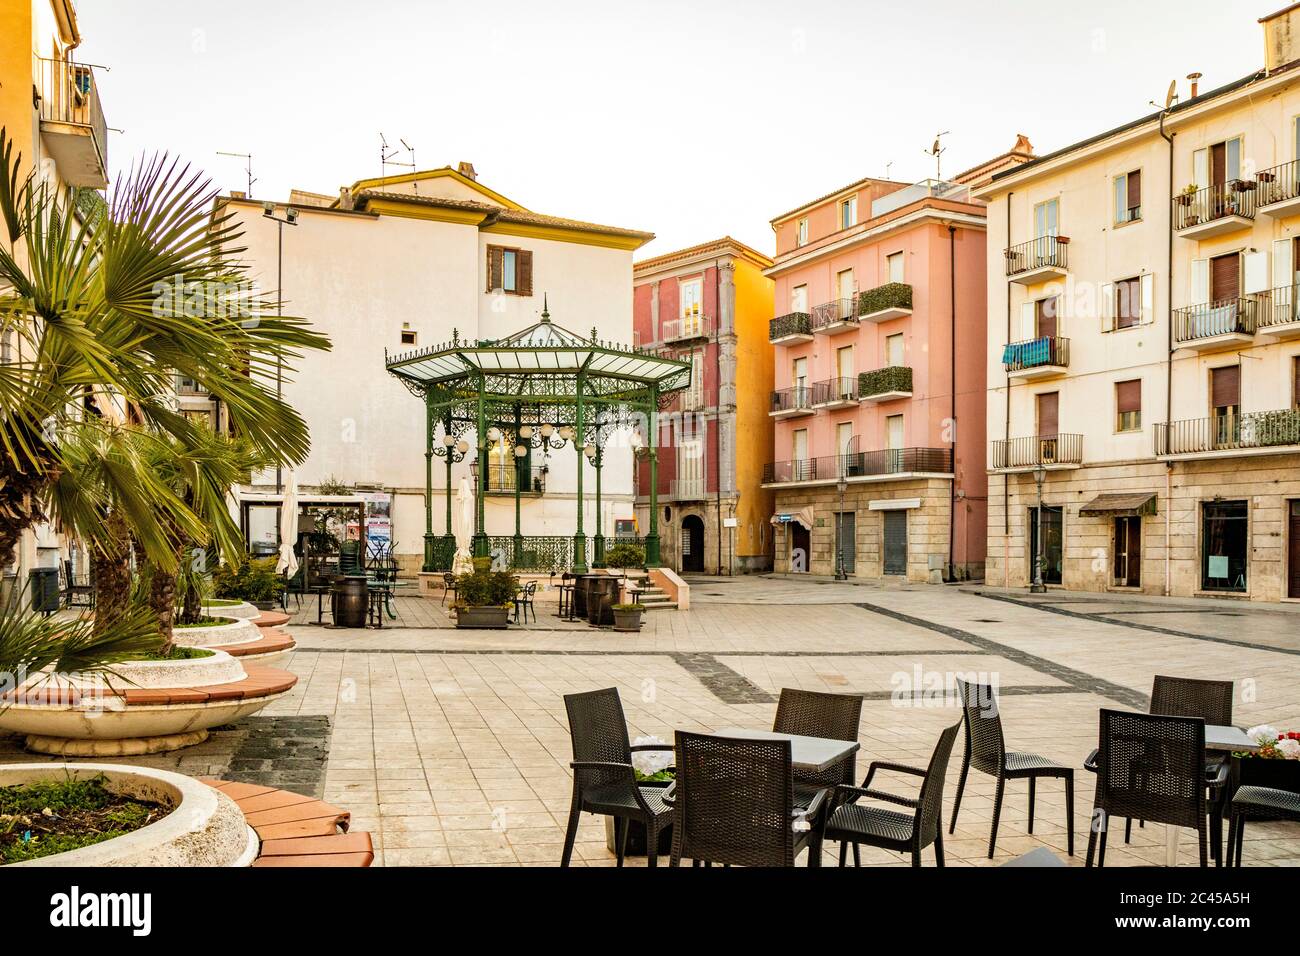 October 27, 2019 - Isernia, Molise, Italy - The deserted square in the city center. The empty tables of bars and restaurants in the evening. The Liber Stock Photo